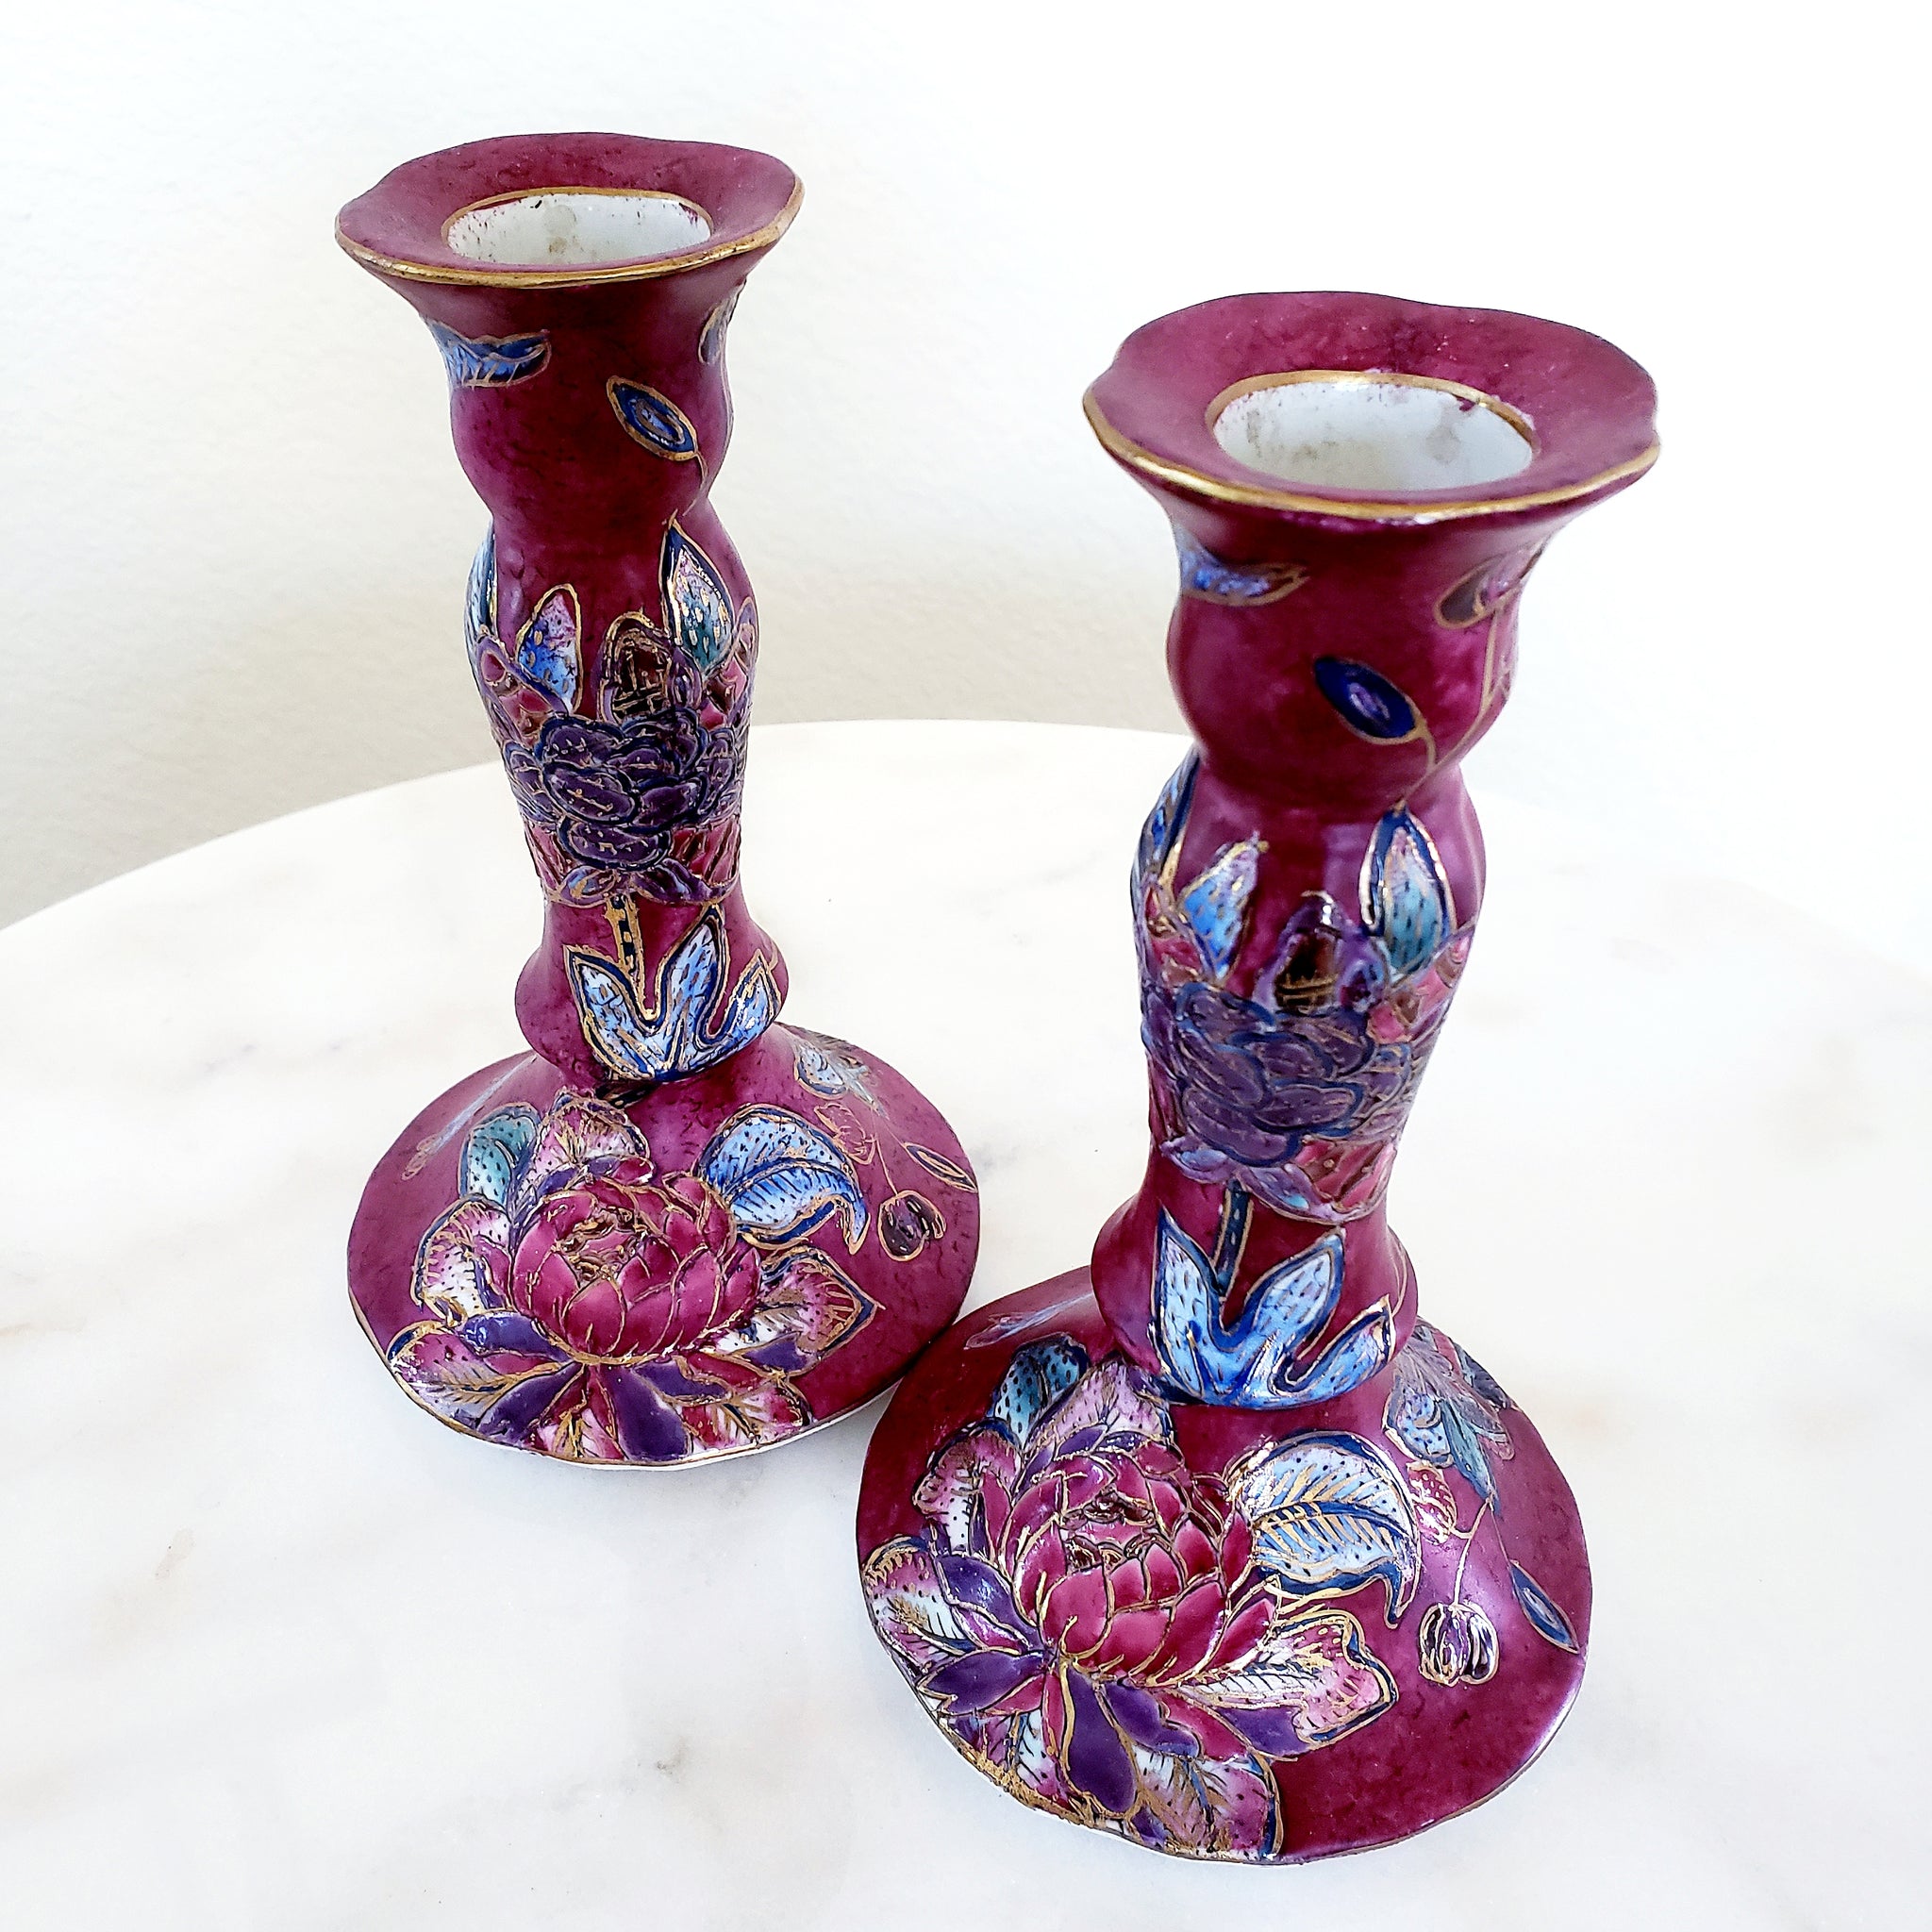 Vintage Pair Of Maroon Asian Ceramic Candlestick Holders - ChicCityVintage